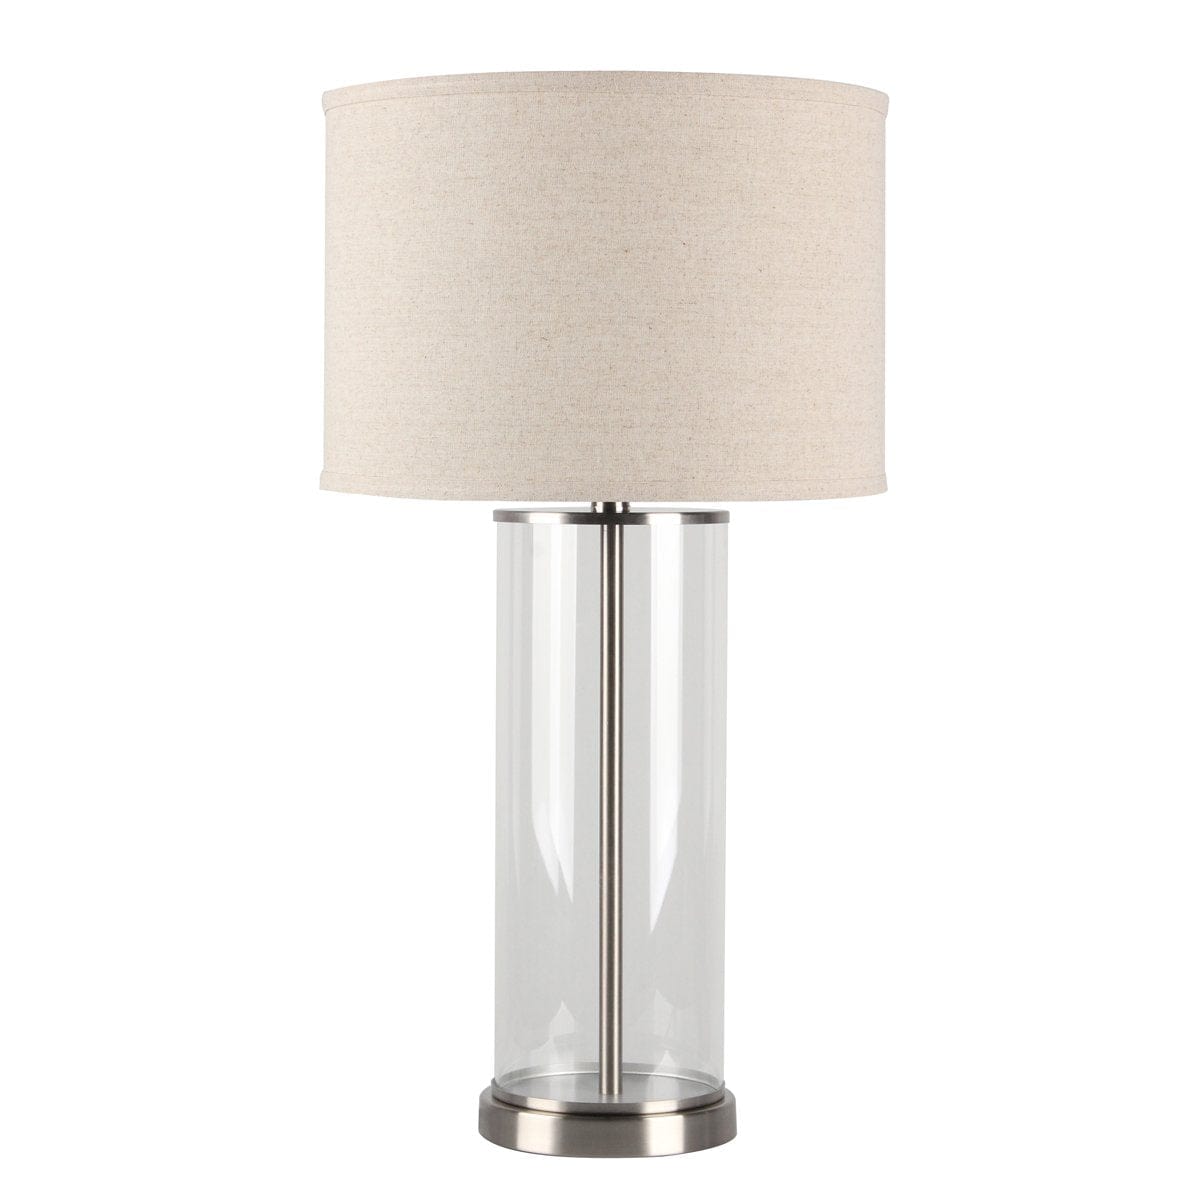 CAFE LIGHTING & LIVING Table Lamp Left Bank Table Lamp - Nickel w Natural Shade B12265